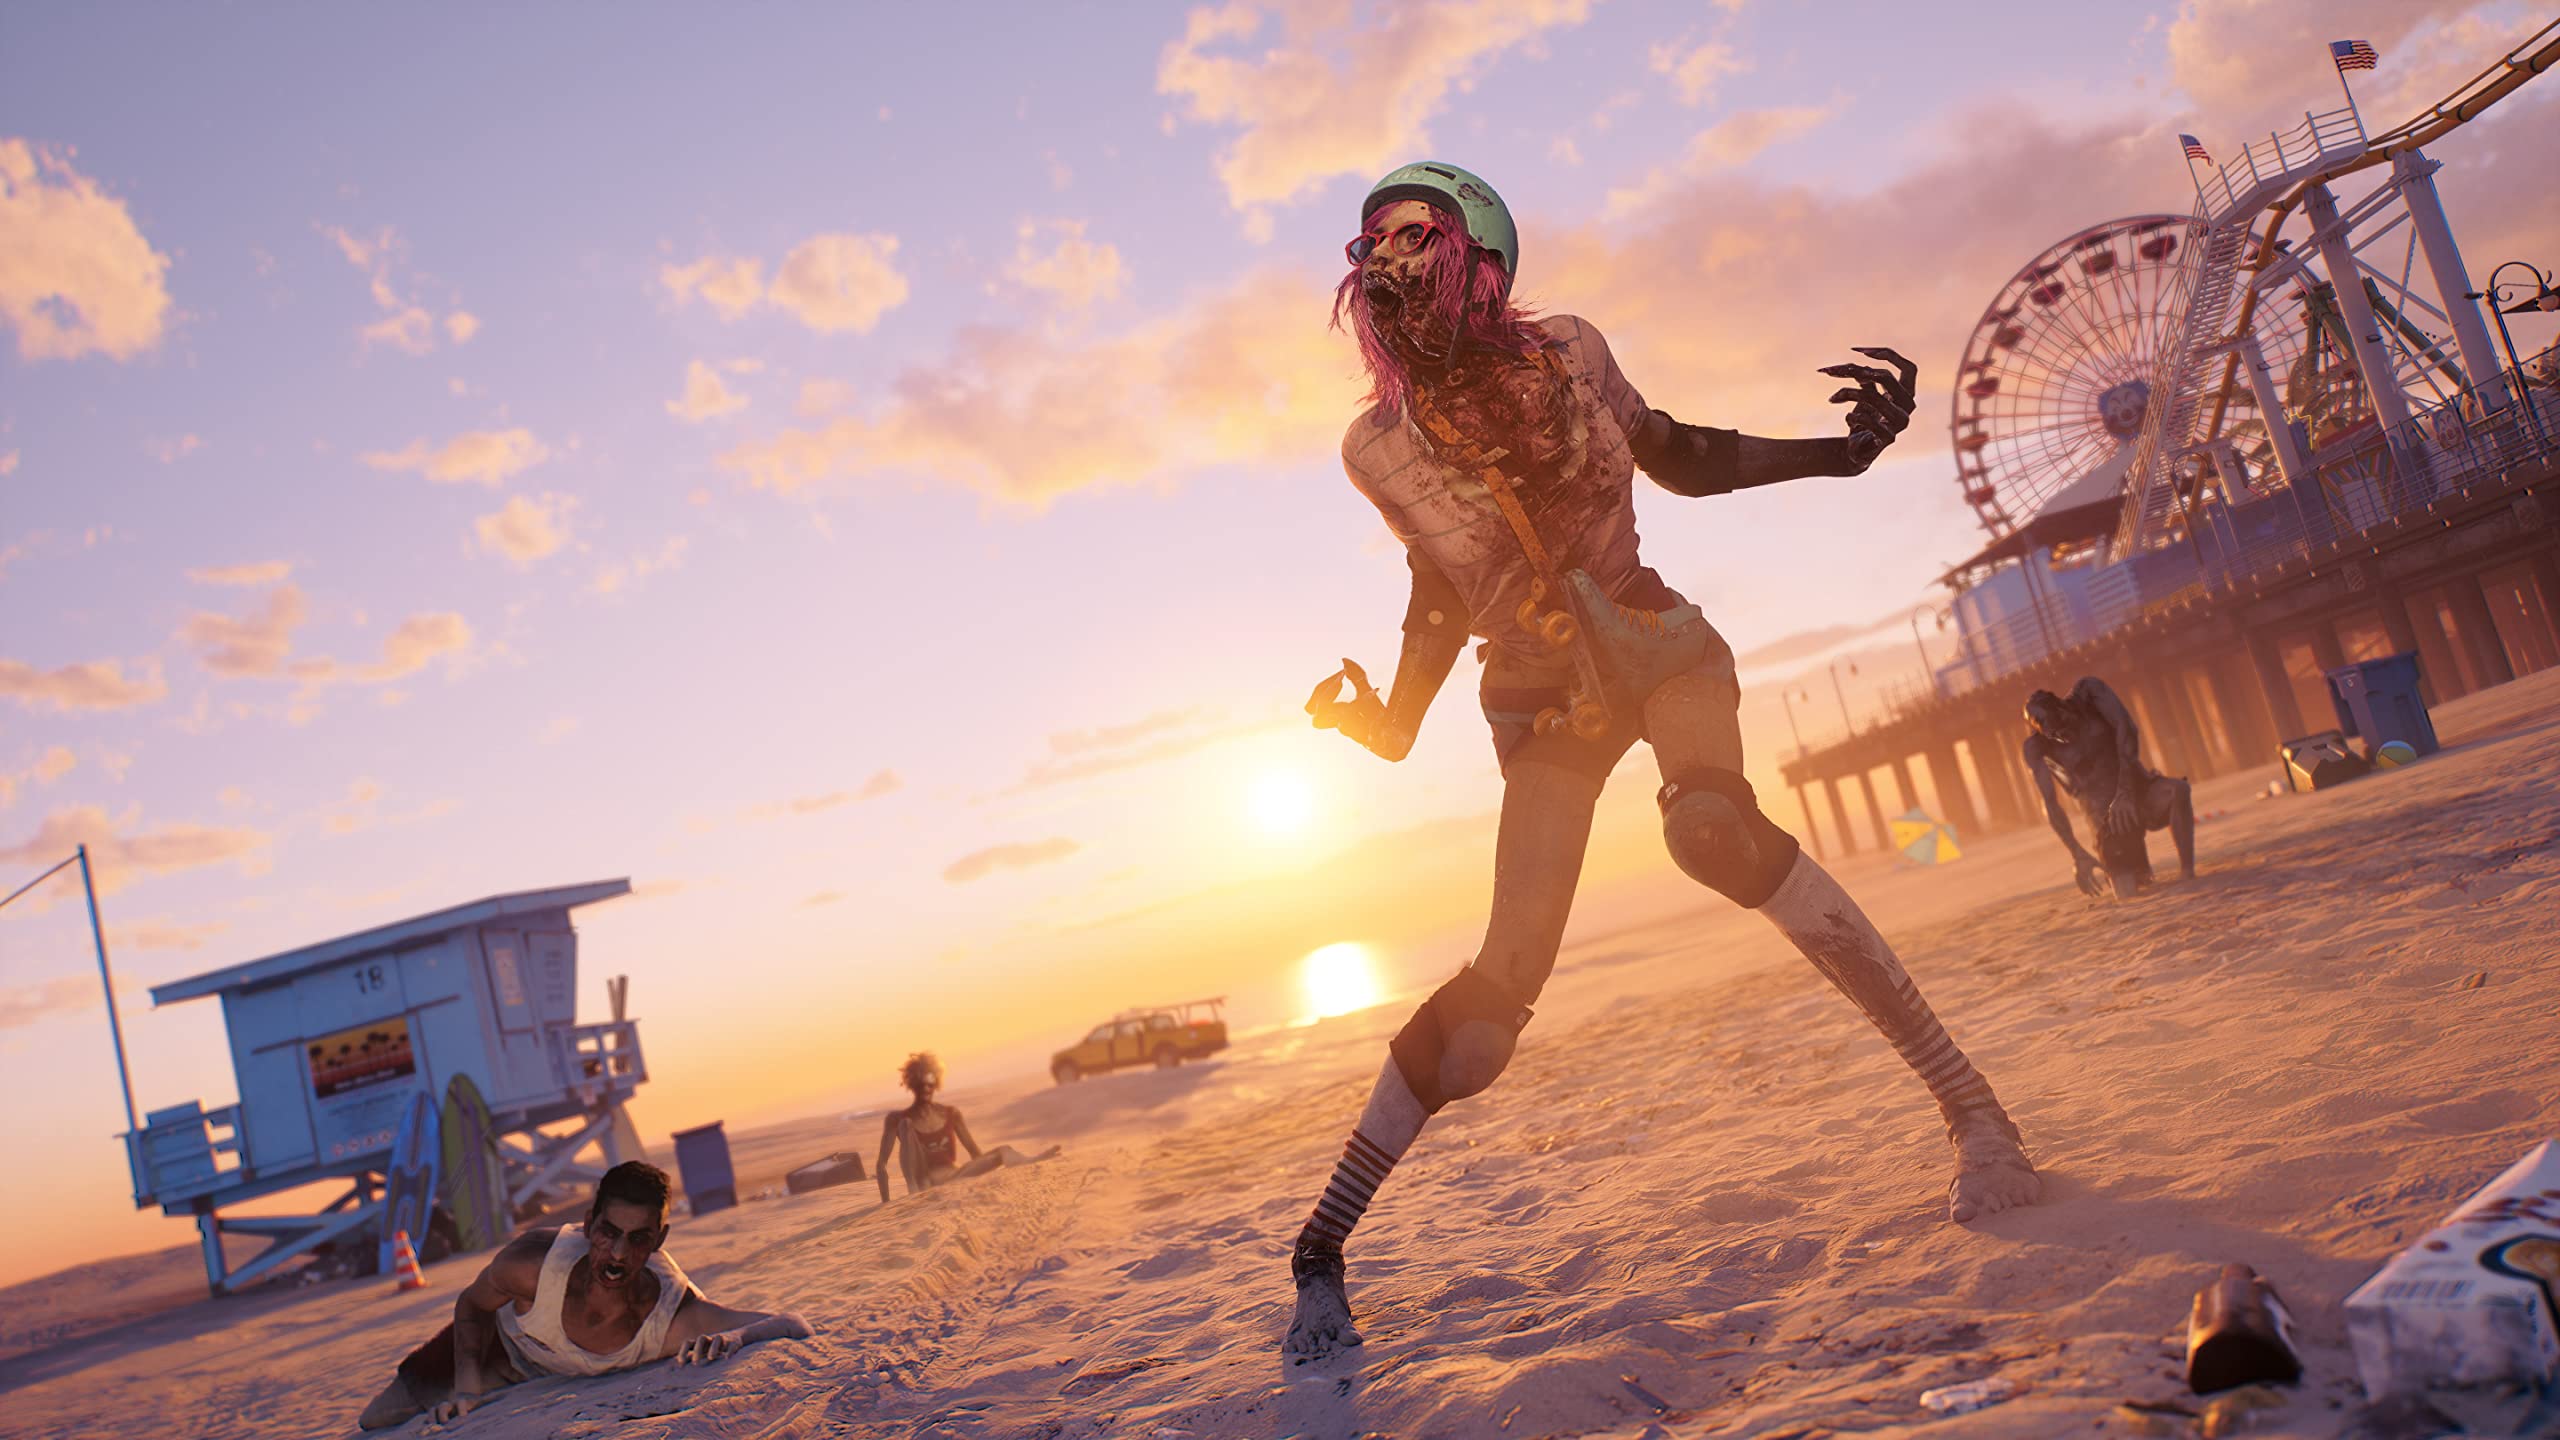 Dead Island 2: HELL-A Edition | All 5 DLC Slips From the Collector's  Edition NEW